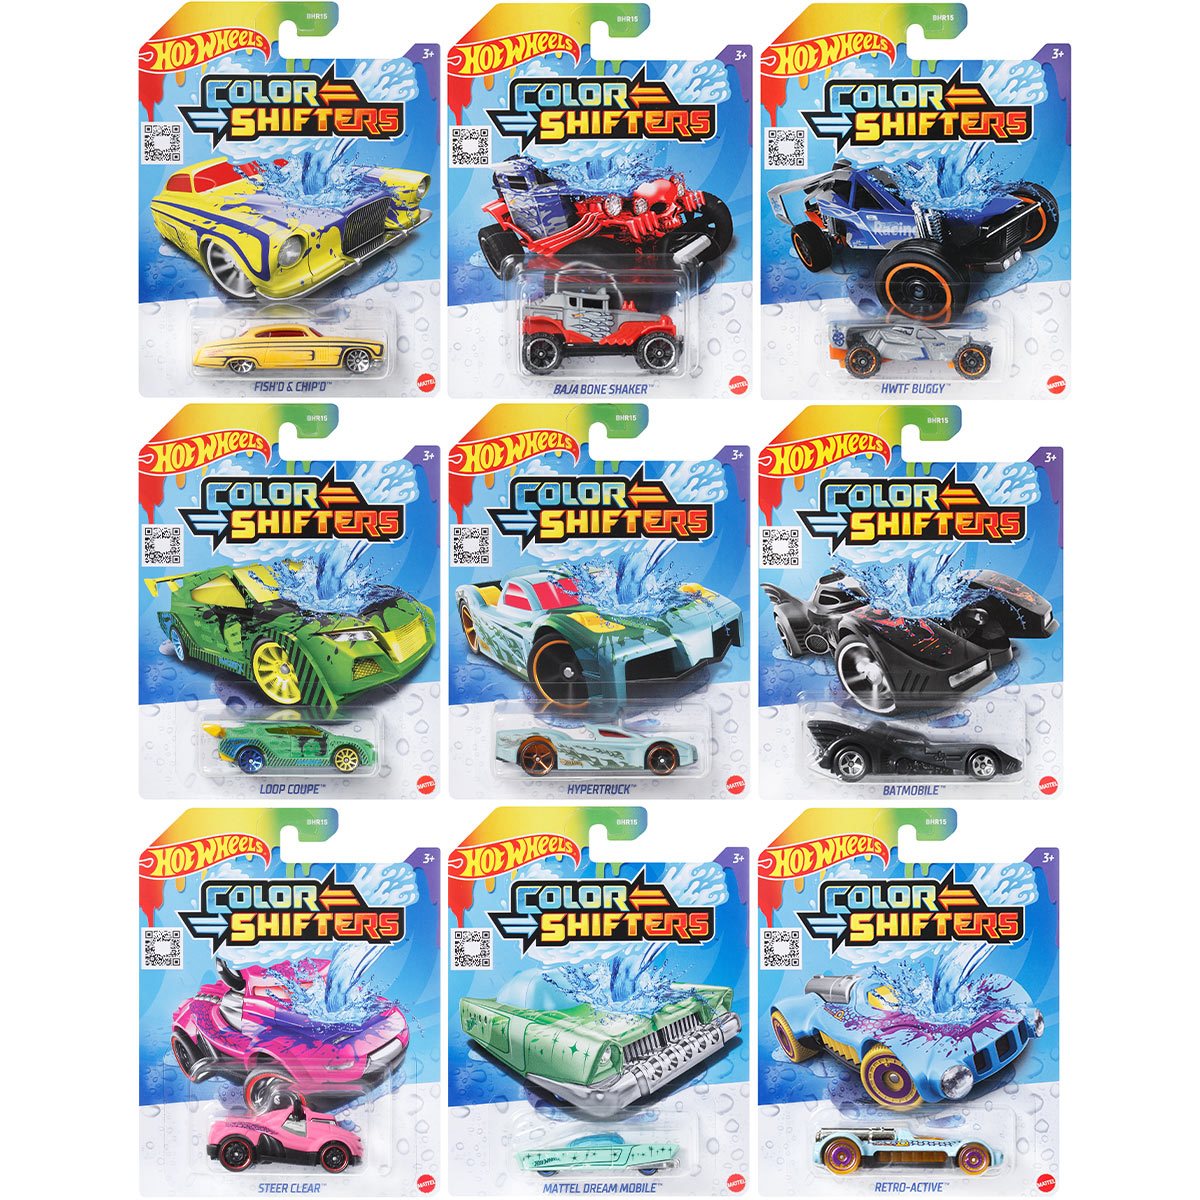 Hot Wheels Color Shifters toy diecast cars